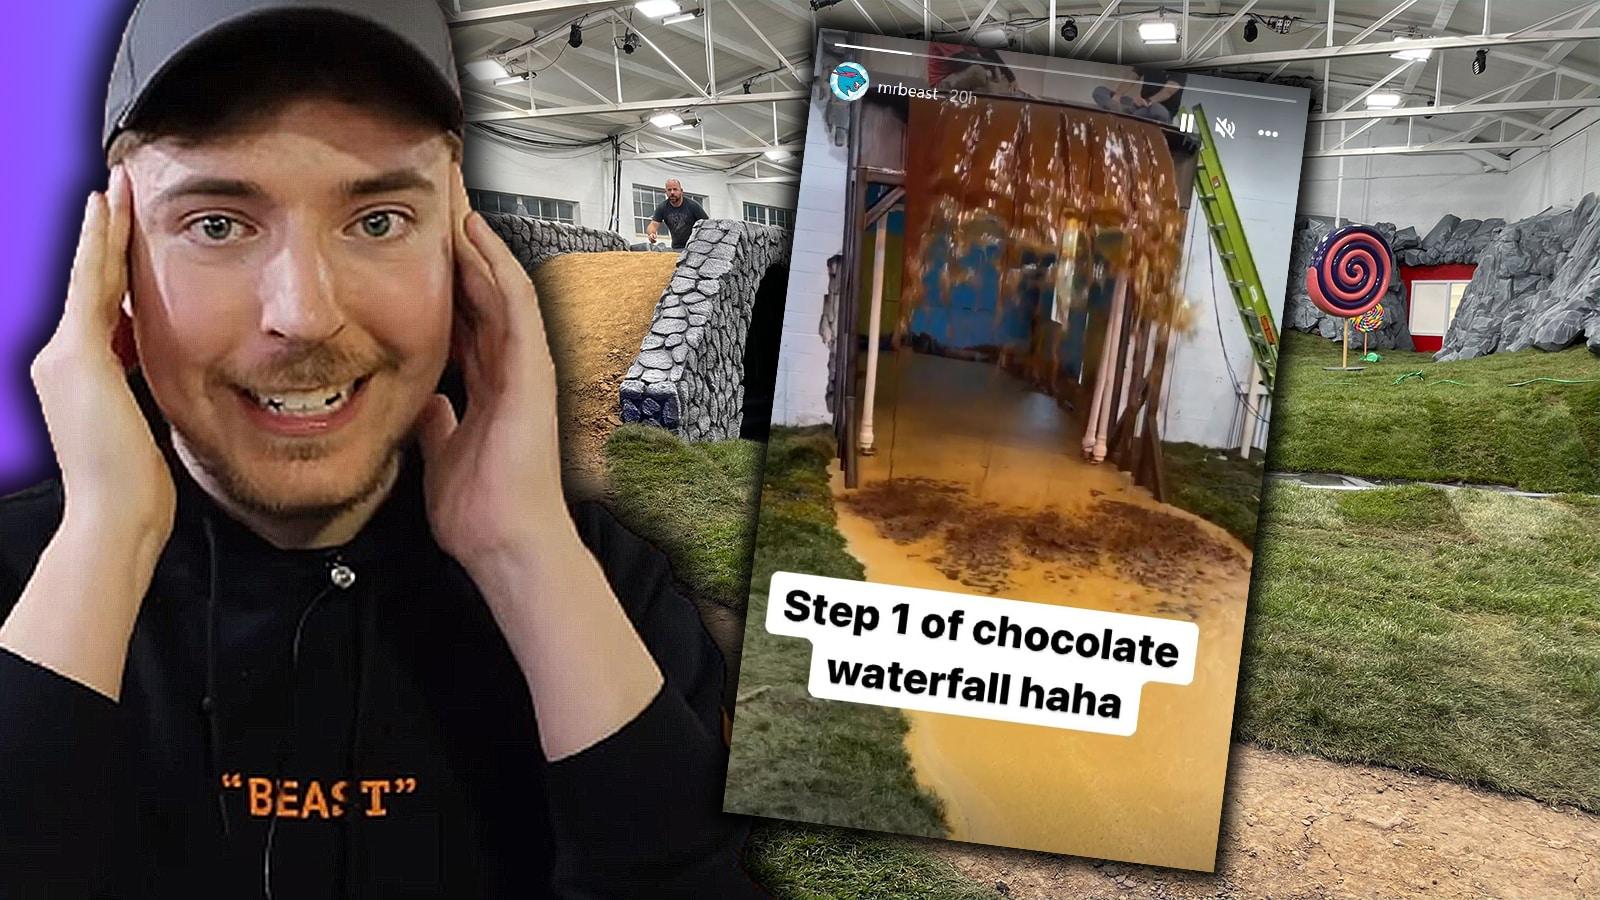 MrBeast shows off chocolate factory